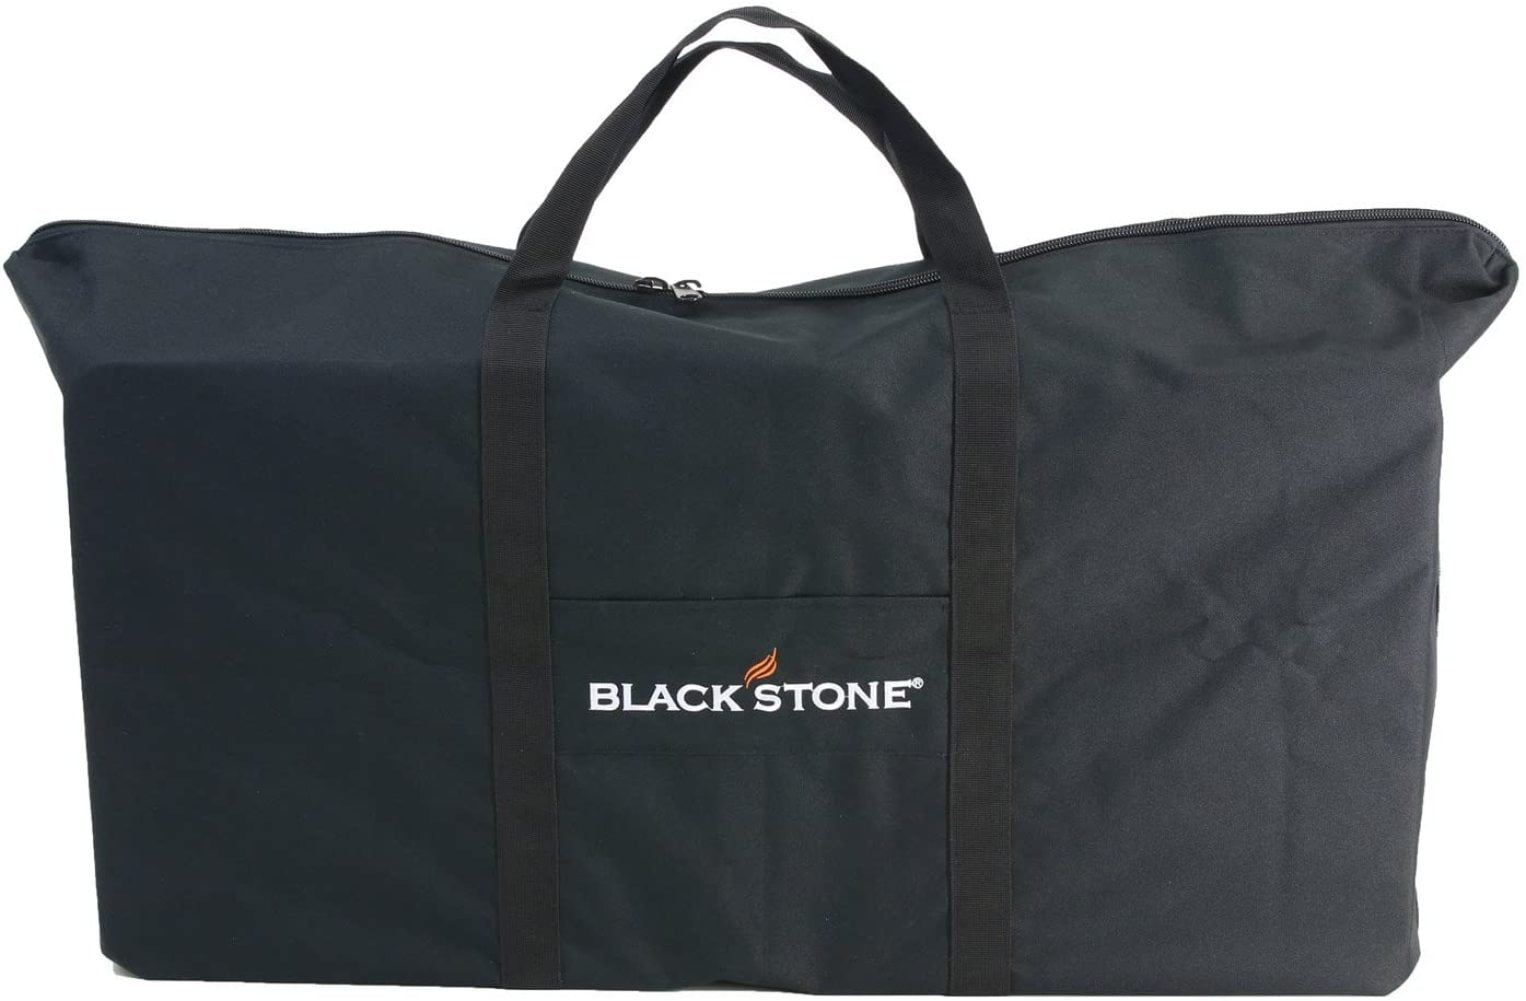 Heavy Duty 600 D Polyester Weather Resistant with Extra Pockets only fits 36 Griddle/Grill Top .Limited Edition Griddle Bag Does not fit Full Griddle 36 Griddle Top Carry Bag 